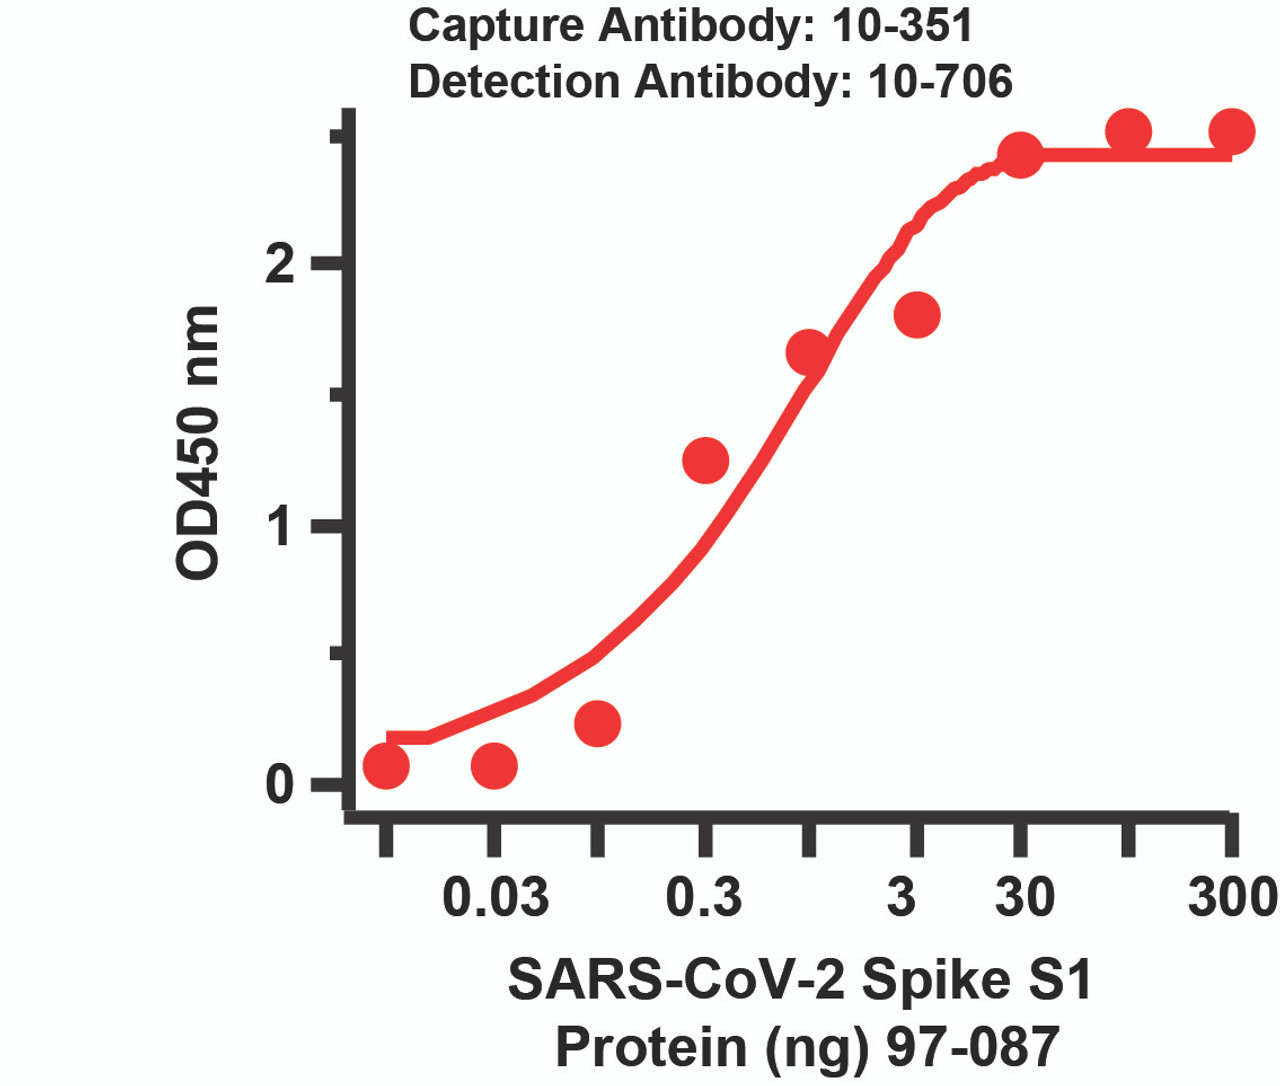 Sandwich ELISA for SARS-CoV-2 (COVID-19) Matched Pair Spike S1 Antibodies
Antibodies: SARS-CoV-2 (COVID-19) Spike Antibodies, 10-351 and 10-706. A sandwich ELISA was performed using SARS-CoV-2 Spike S1 antibody (10-351, 2ug/ml) as capture antibody, the Spike S1 recombinant protein as the binding protein (97-087), and the anti-SARS-CoV-2 Spike S1 antibody (10-706, 1ug/ml) as the detection antibody. Secondary: Mouse anti-human IgG HRP conjugate (PM6727) at 1:10000 dilution. Detection range is from 0.03 ng to 300 ng. EC50 = 1.58 ng